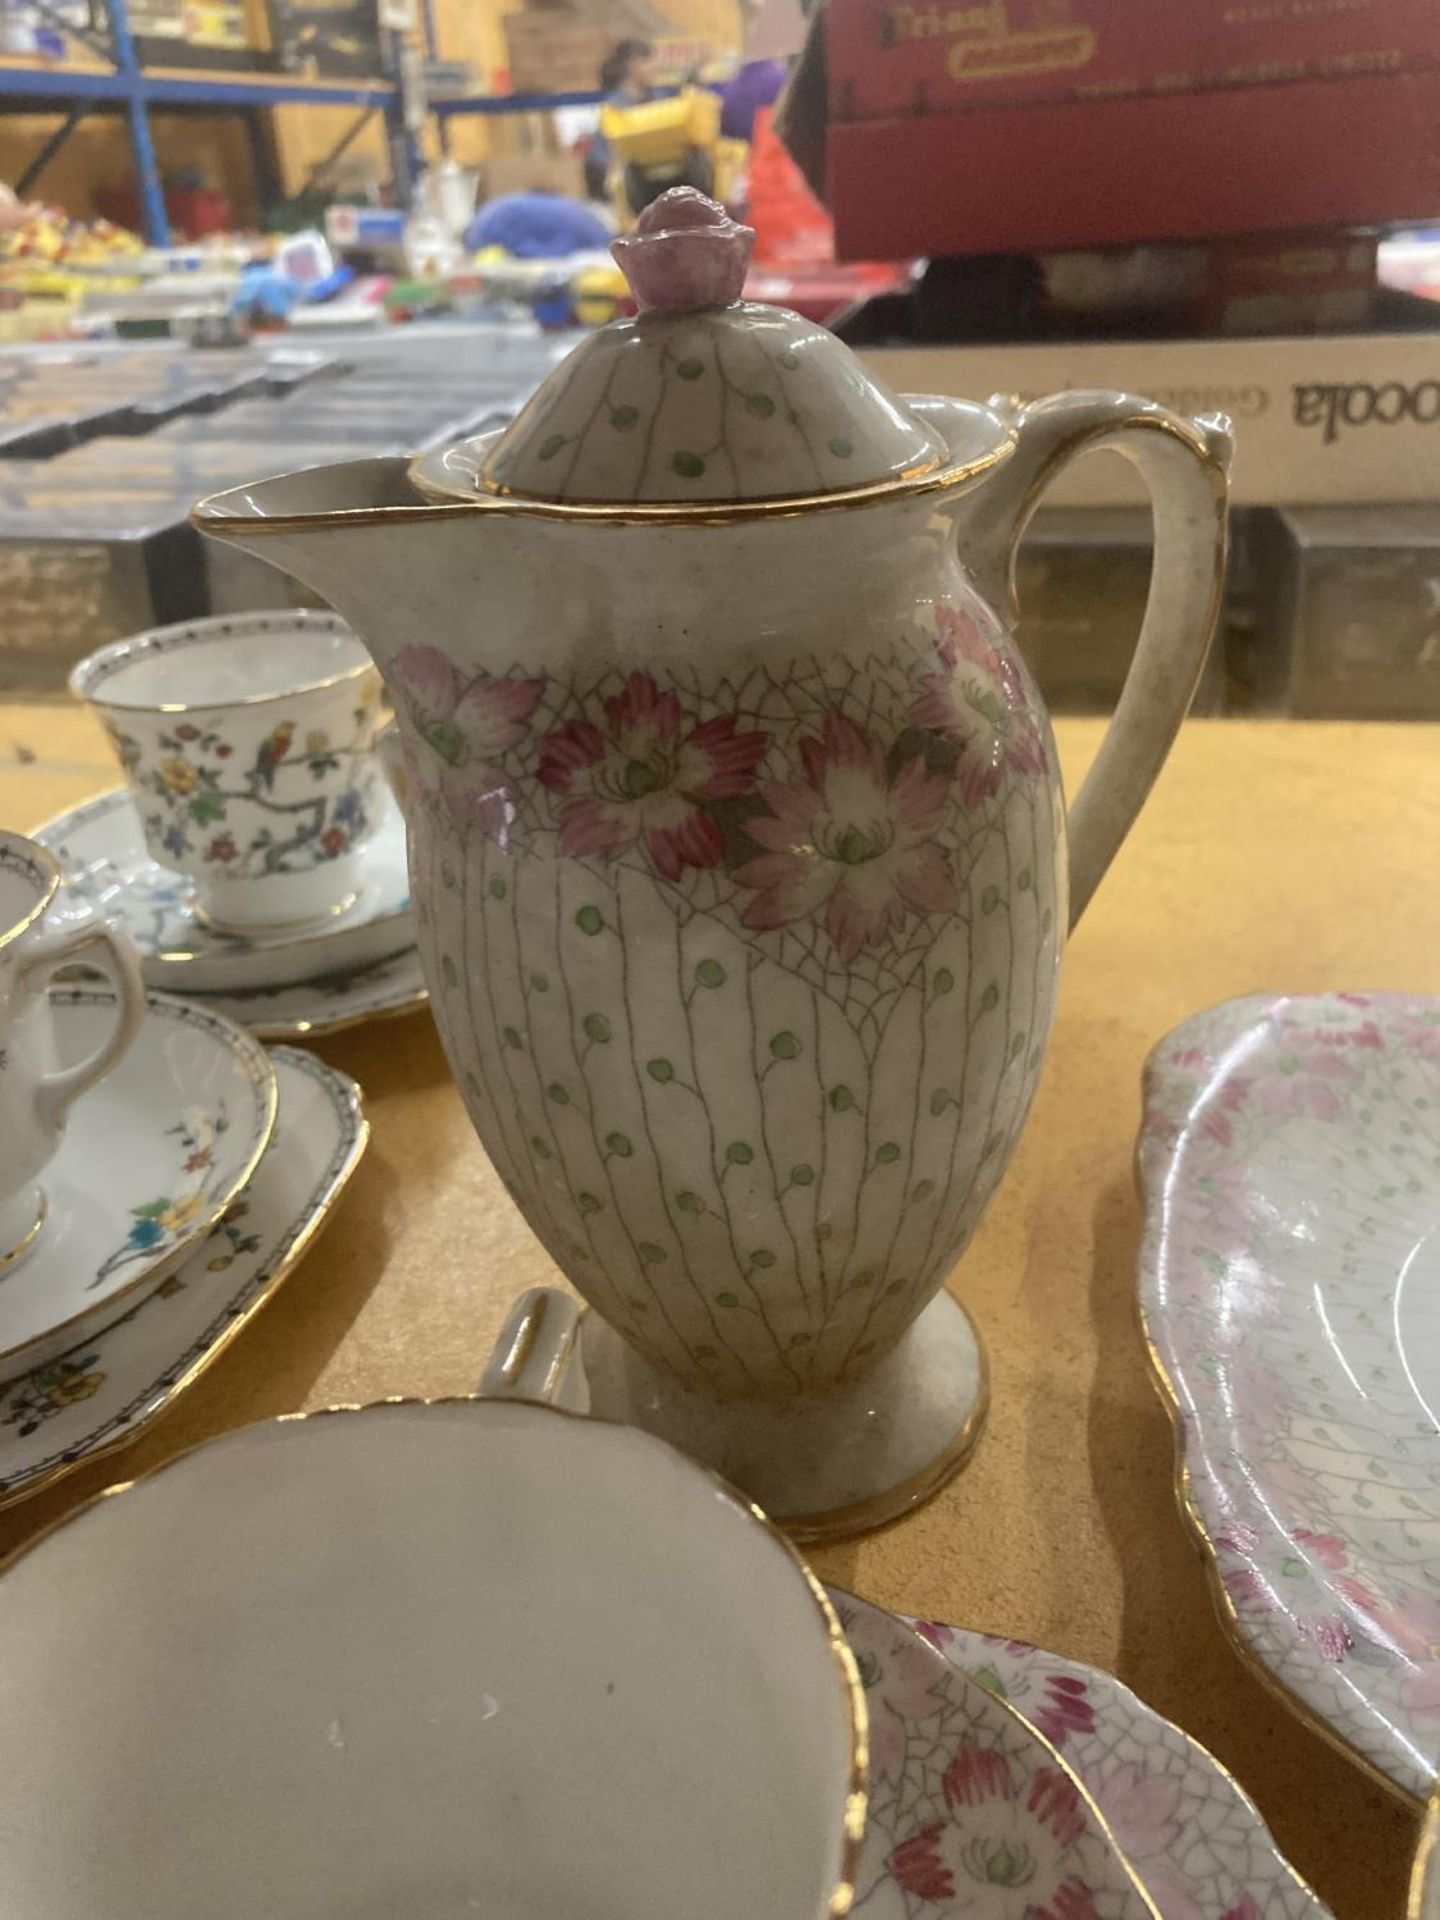 A DELPHINE CHINA TEA AND COFFEE SET IN A PALE PINK FLORAL PATTERN TO INCLUDE A TEA POT, COFFEE - Image 4 of 6